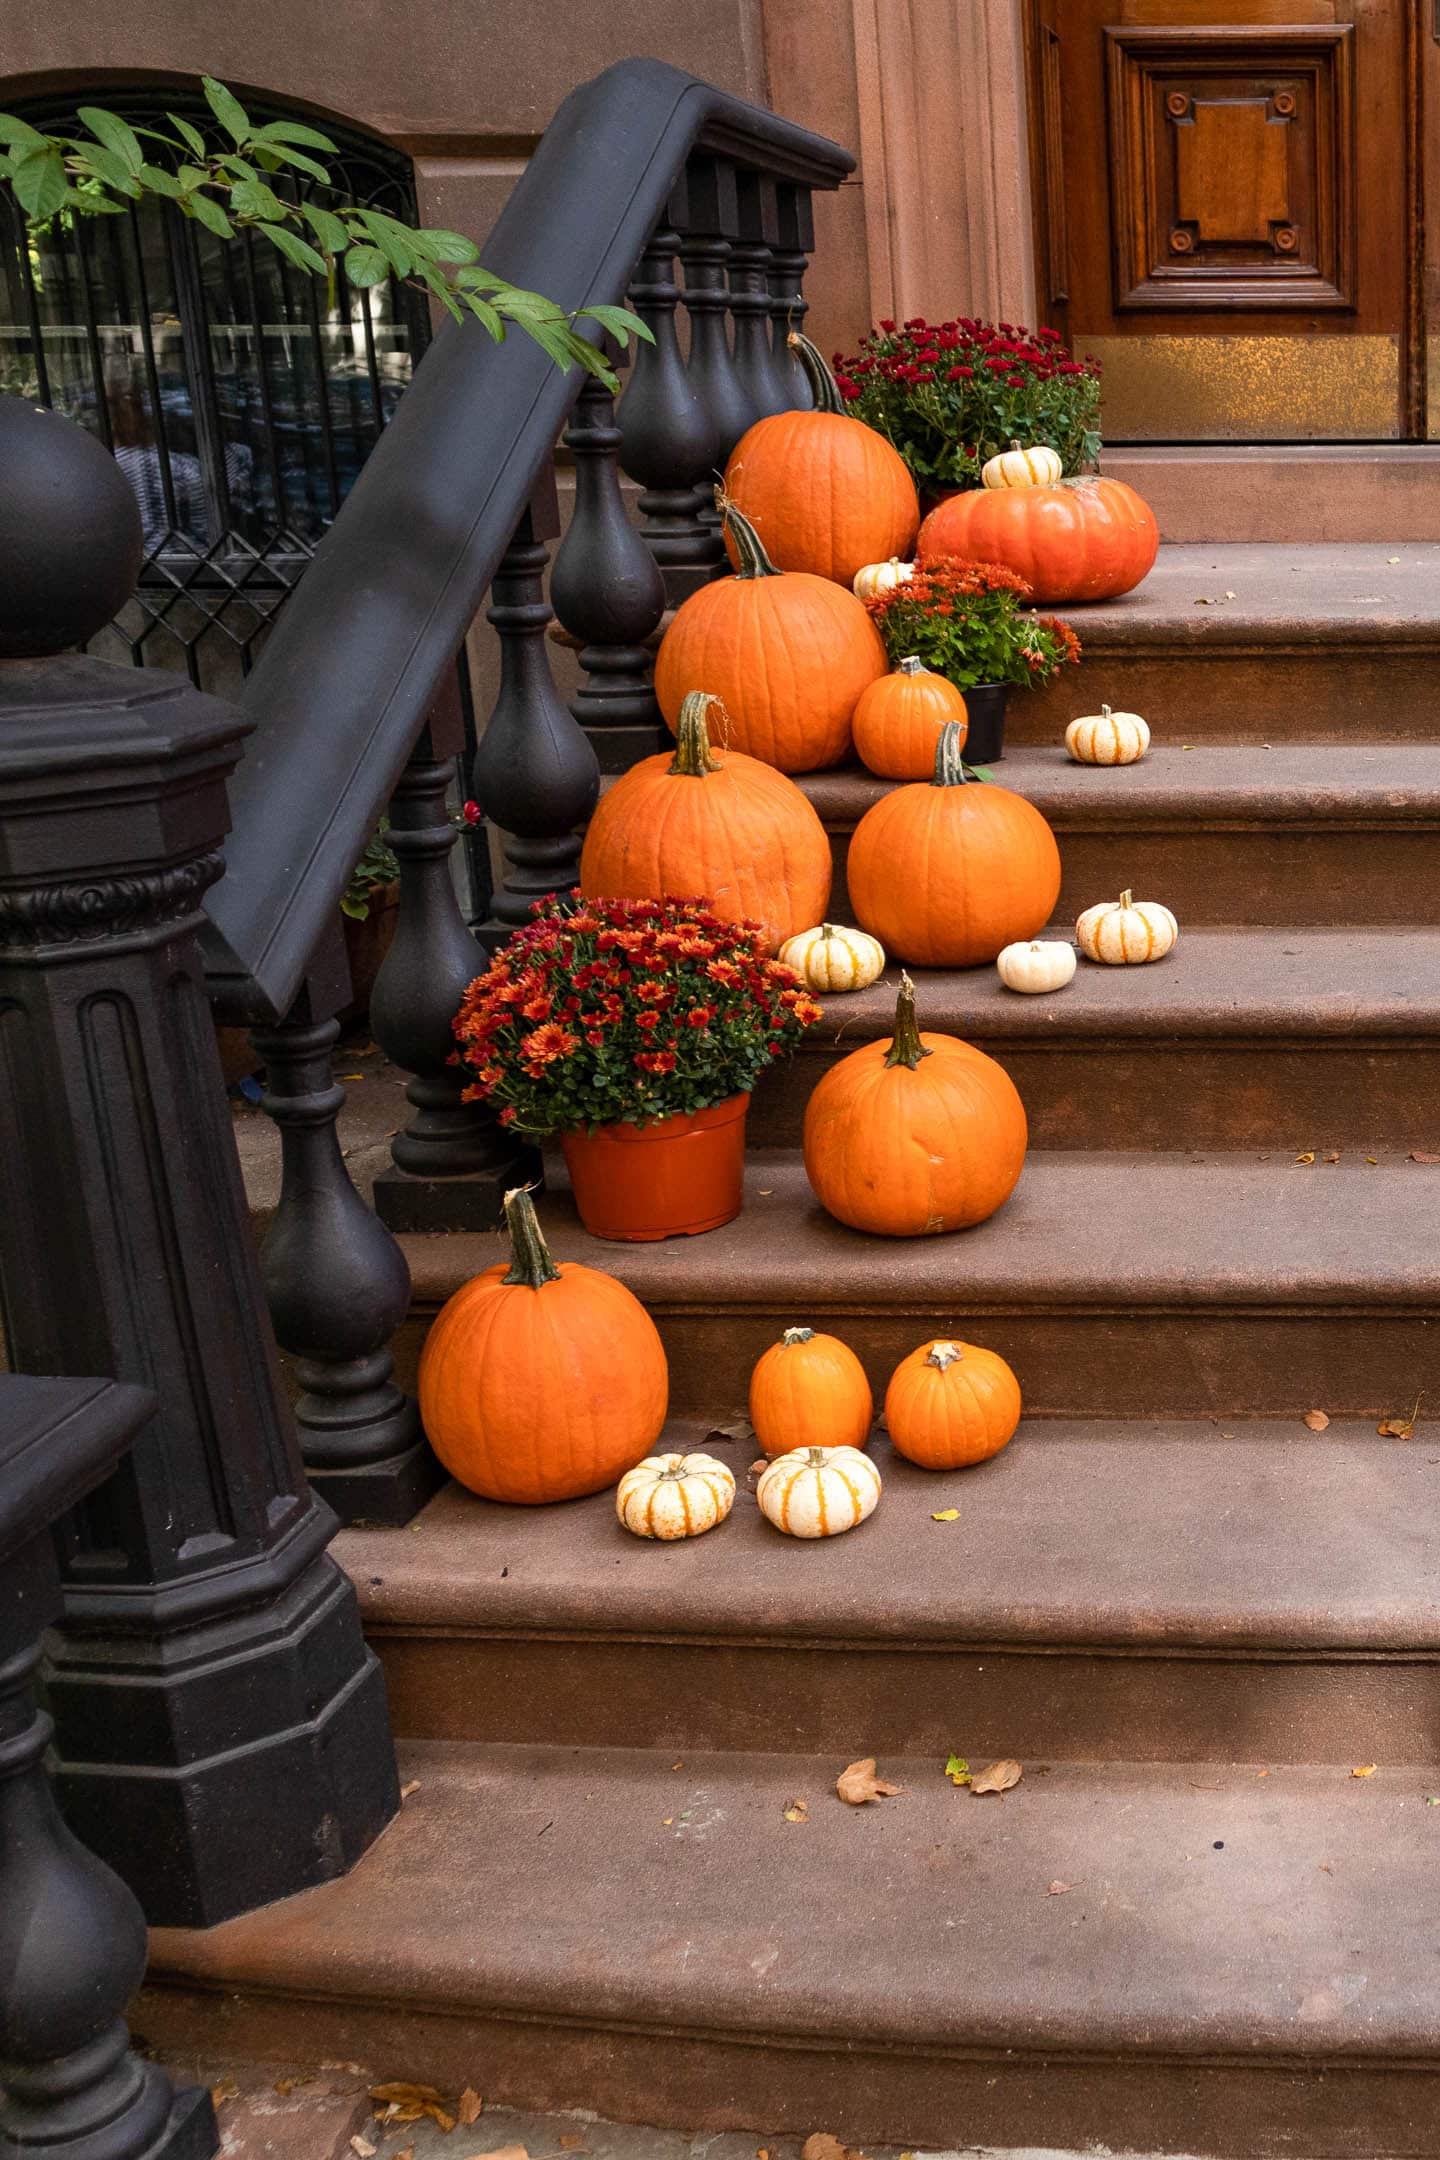 Collection of different sized pumpkins with a few pots of Chrysanthemums on the front porch stairs